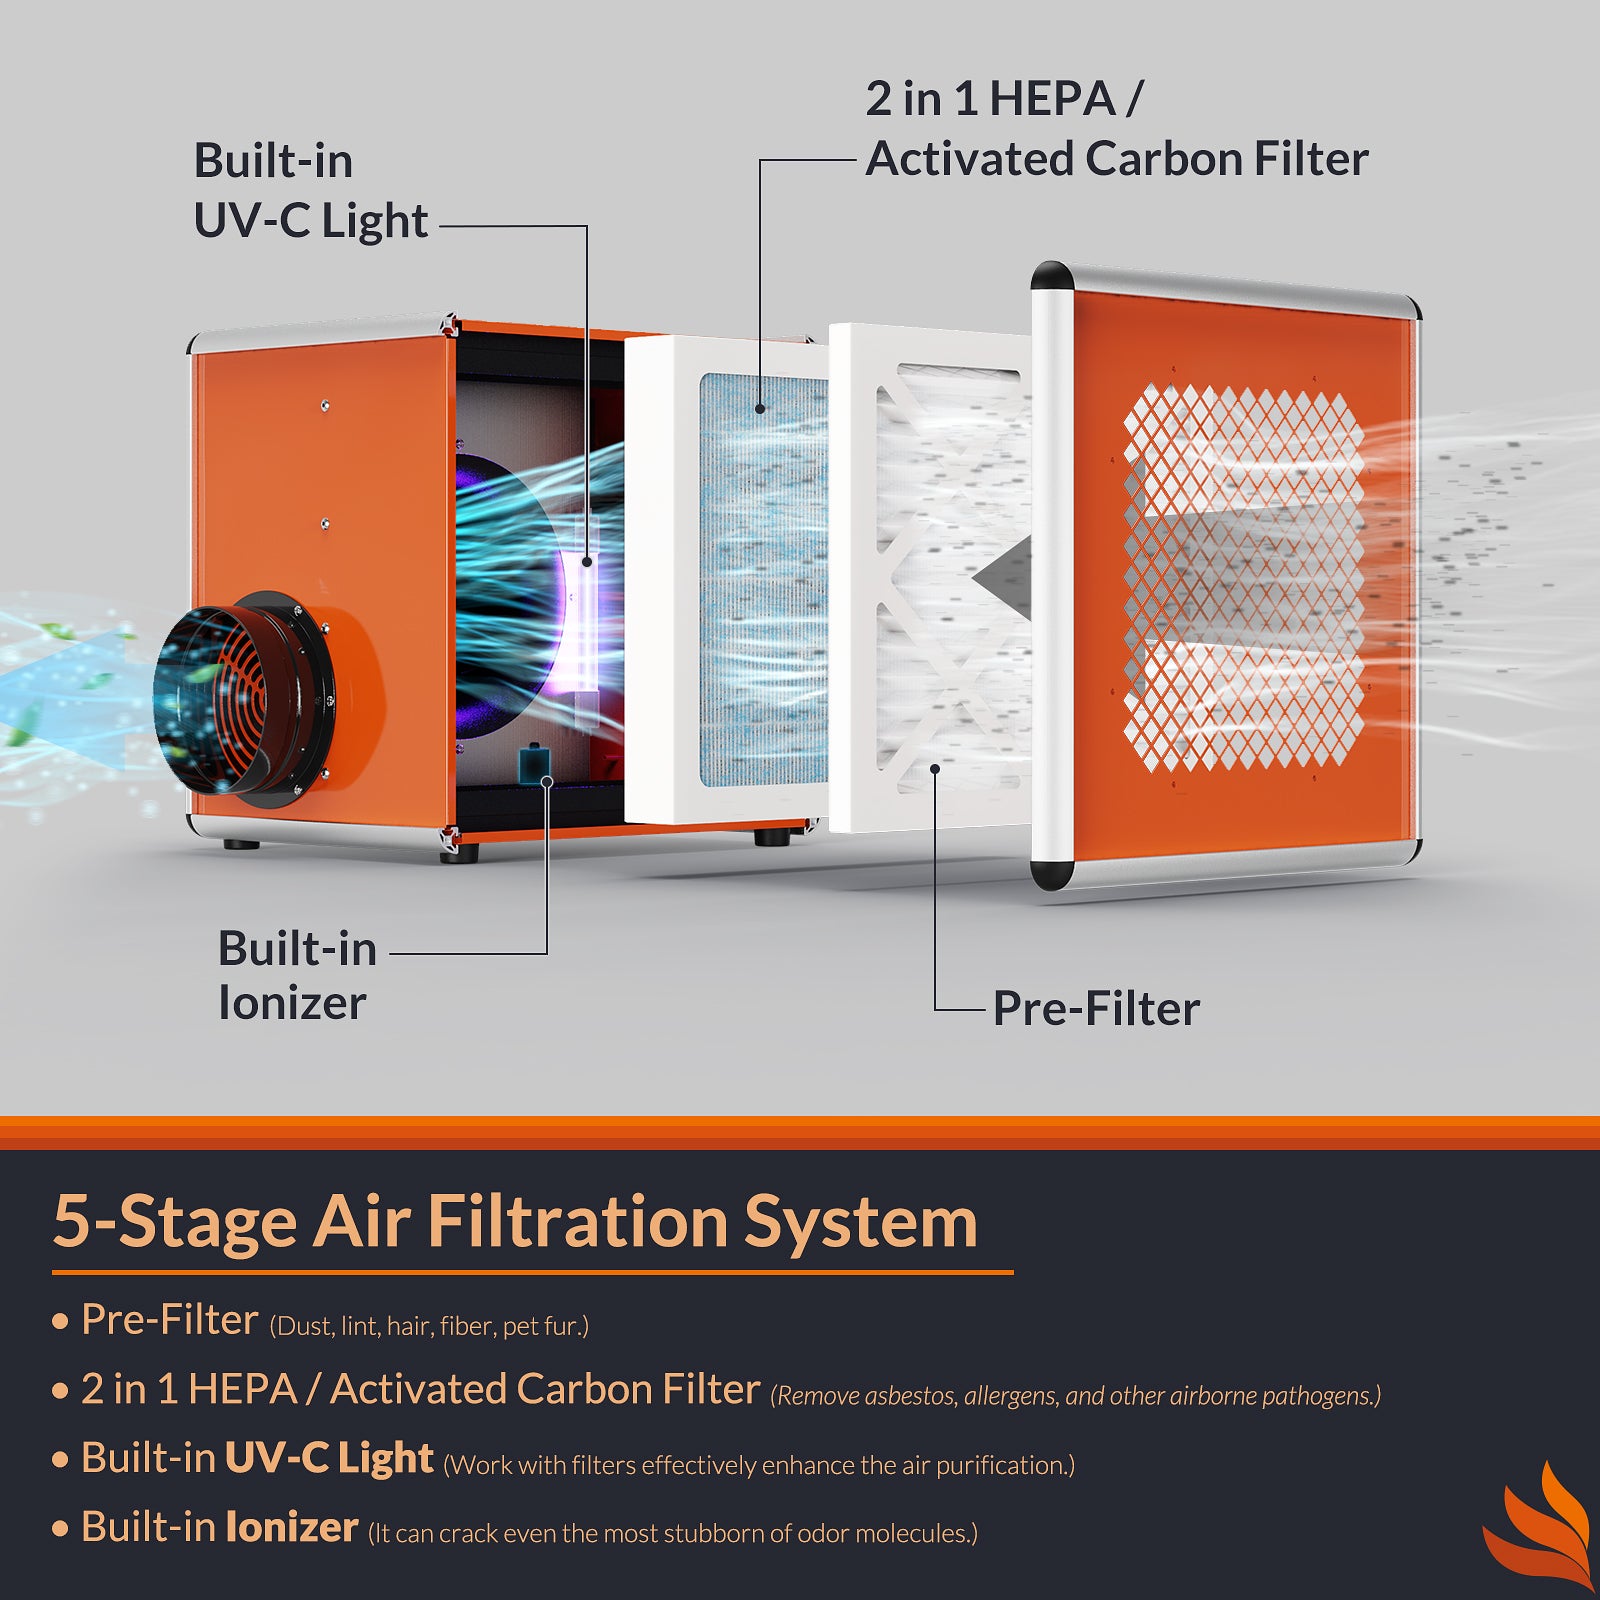 Purisystems Air Scrubber with 5-stage Filtration System, Negative Machine Air Scrubber, Built-in Ionizer and UV-C Light, Professional Water Damage Restoration for Air Cleaner | up to 600 CFM